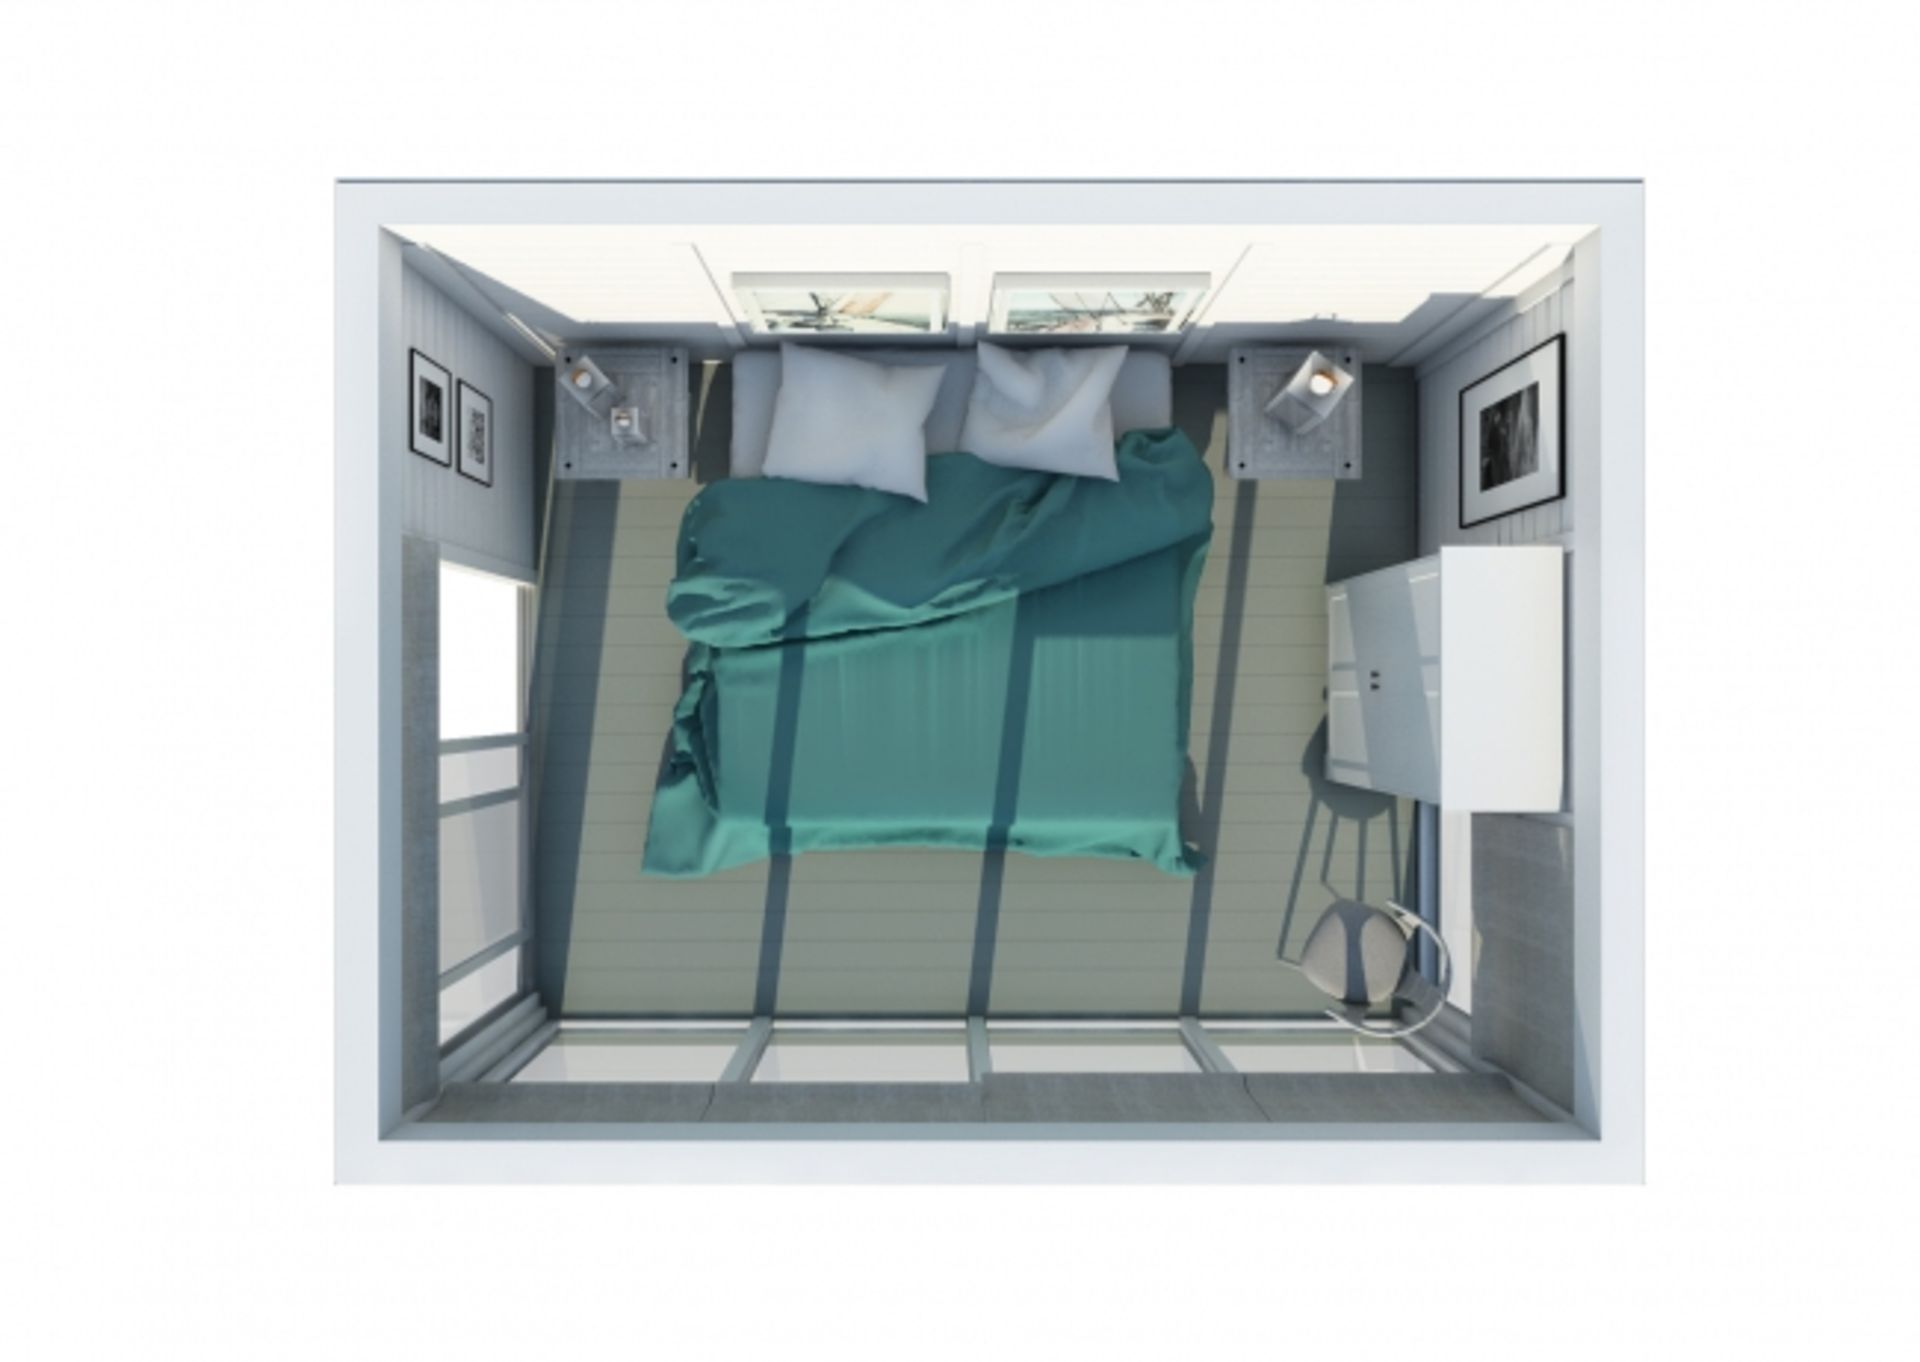 + VAT Brand New Insulated Cube Hotel Room Cabin - 3 x 4m - Insulated Walls + Glass Sliding Doors - - Image 3 of 4